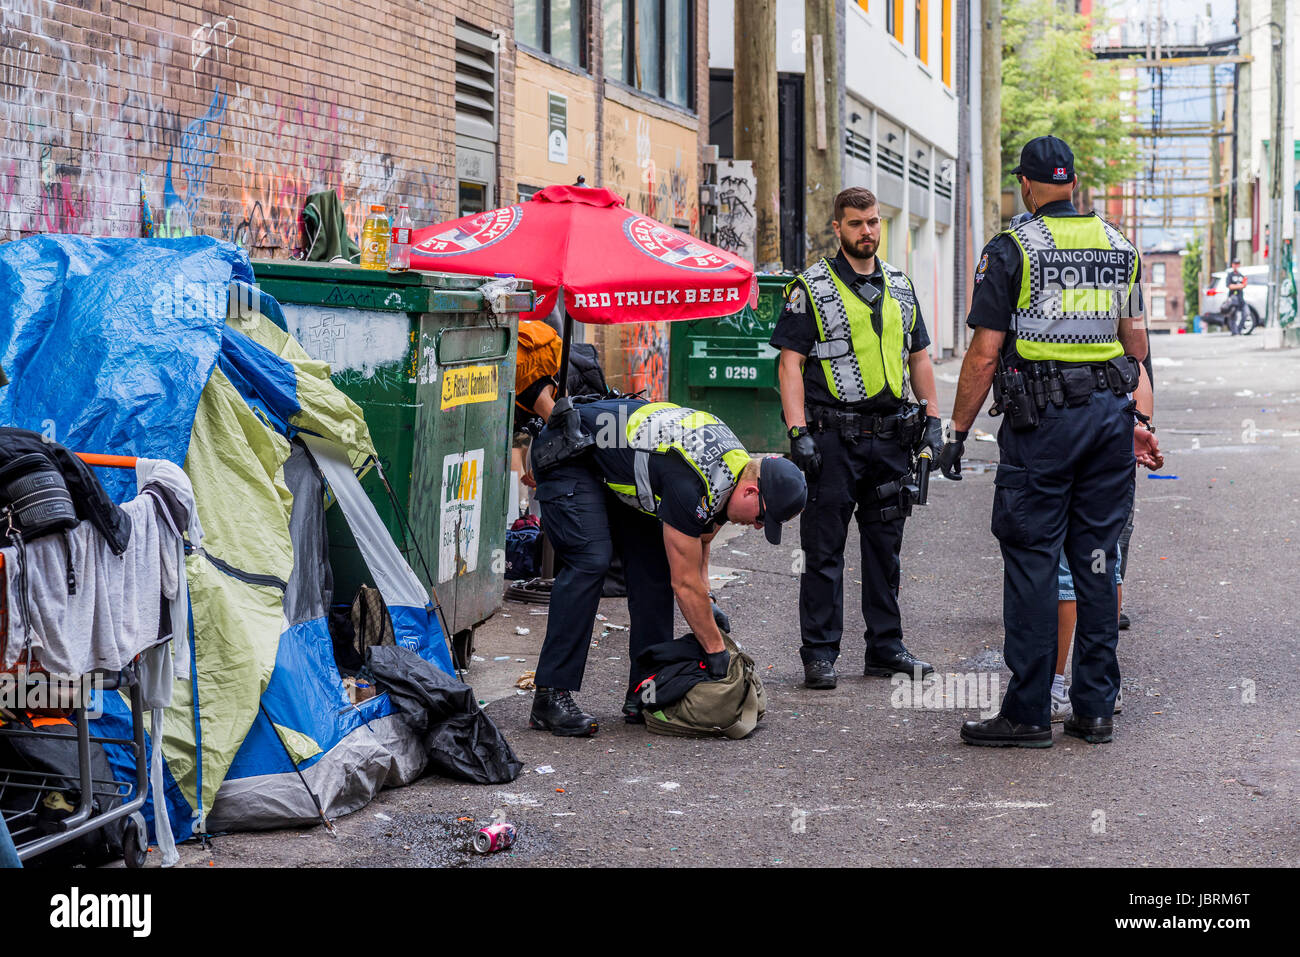 Police handcuff and detain man in alleyway, Hastings Street, DTES, Vancouver, British Columbia, Canada. Credit: Michael Wheatley/Alamy Live News Stock Photo